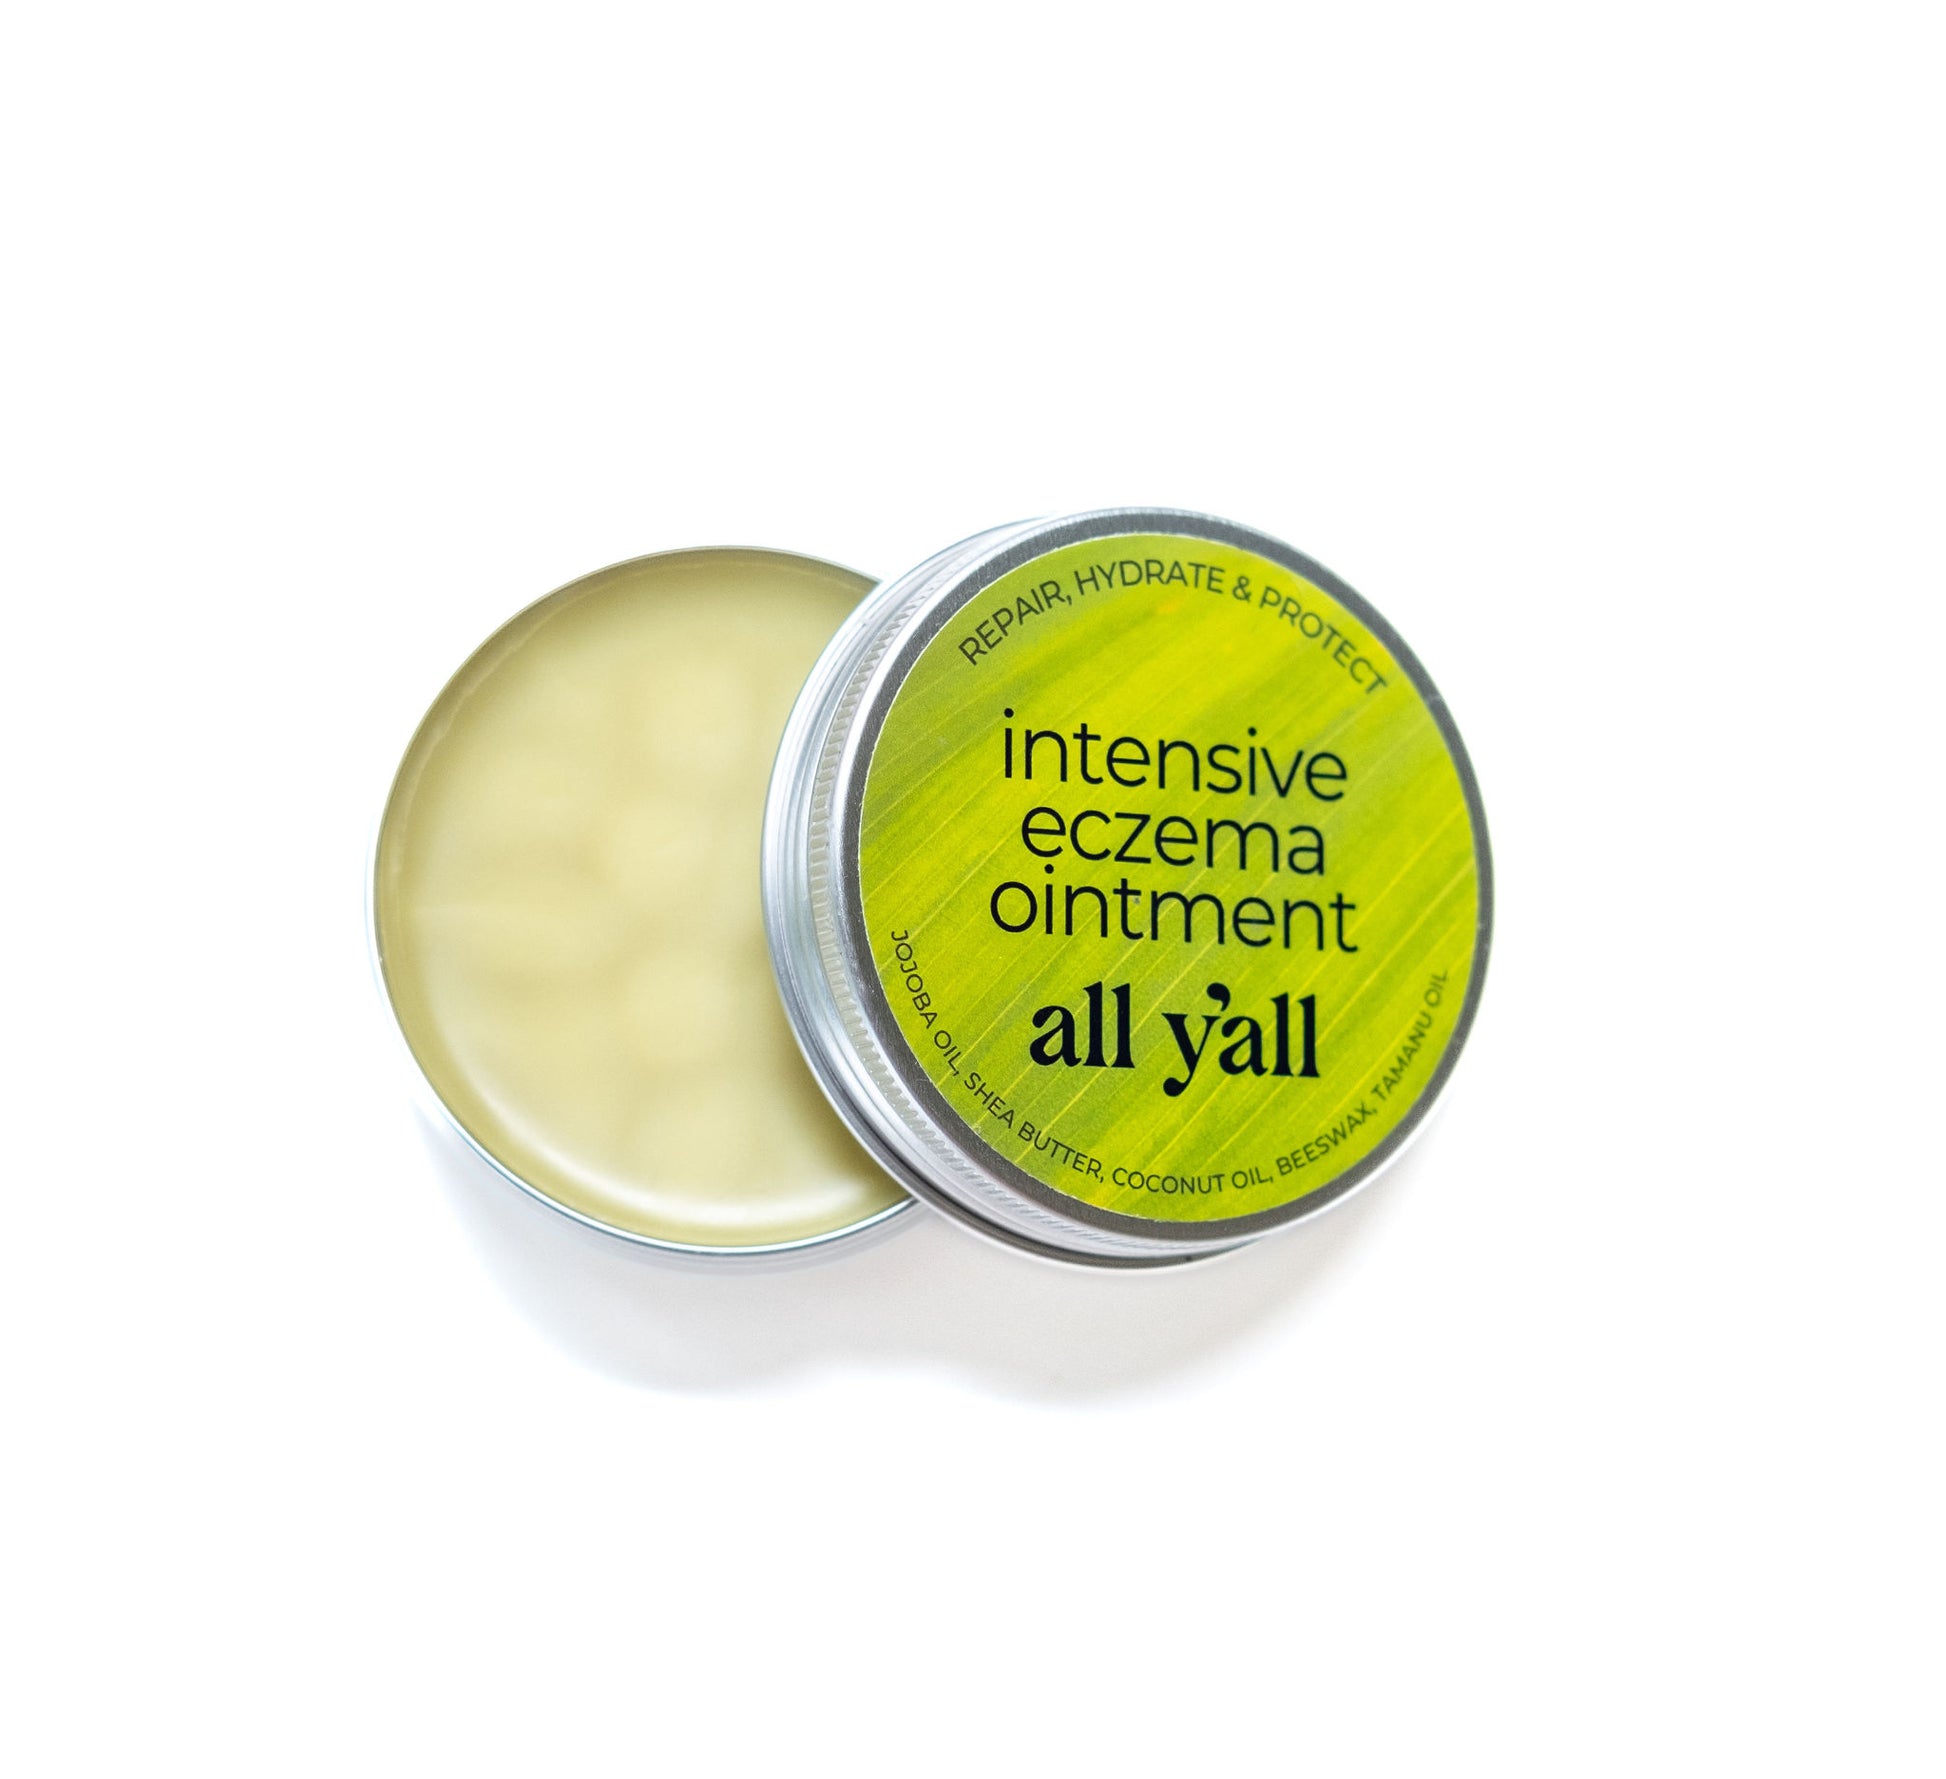 Intense Eczema Ointment | Repair, Hydrate and Protect | All Y'all Skincare